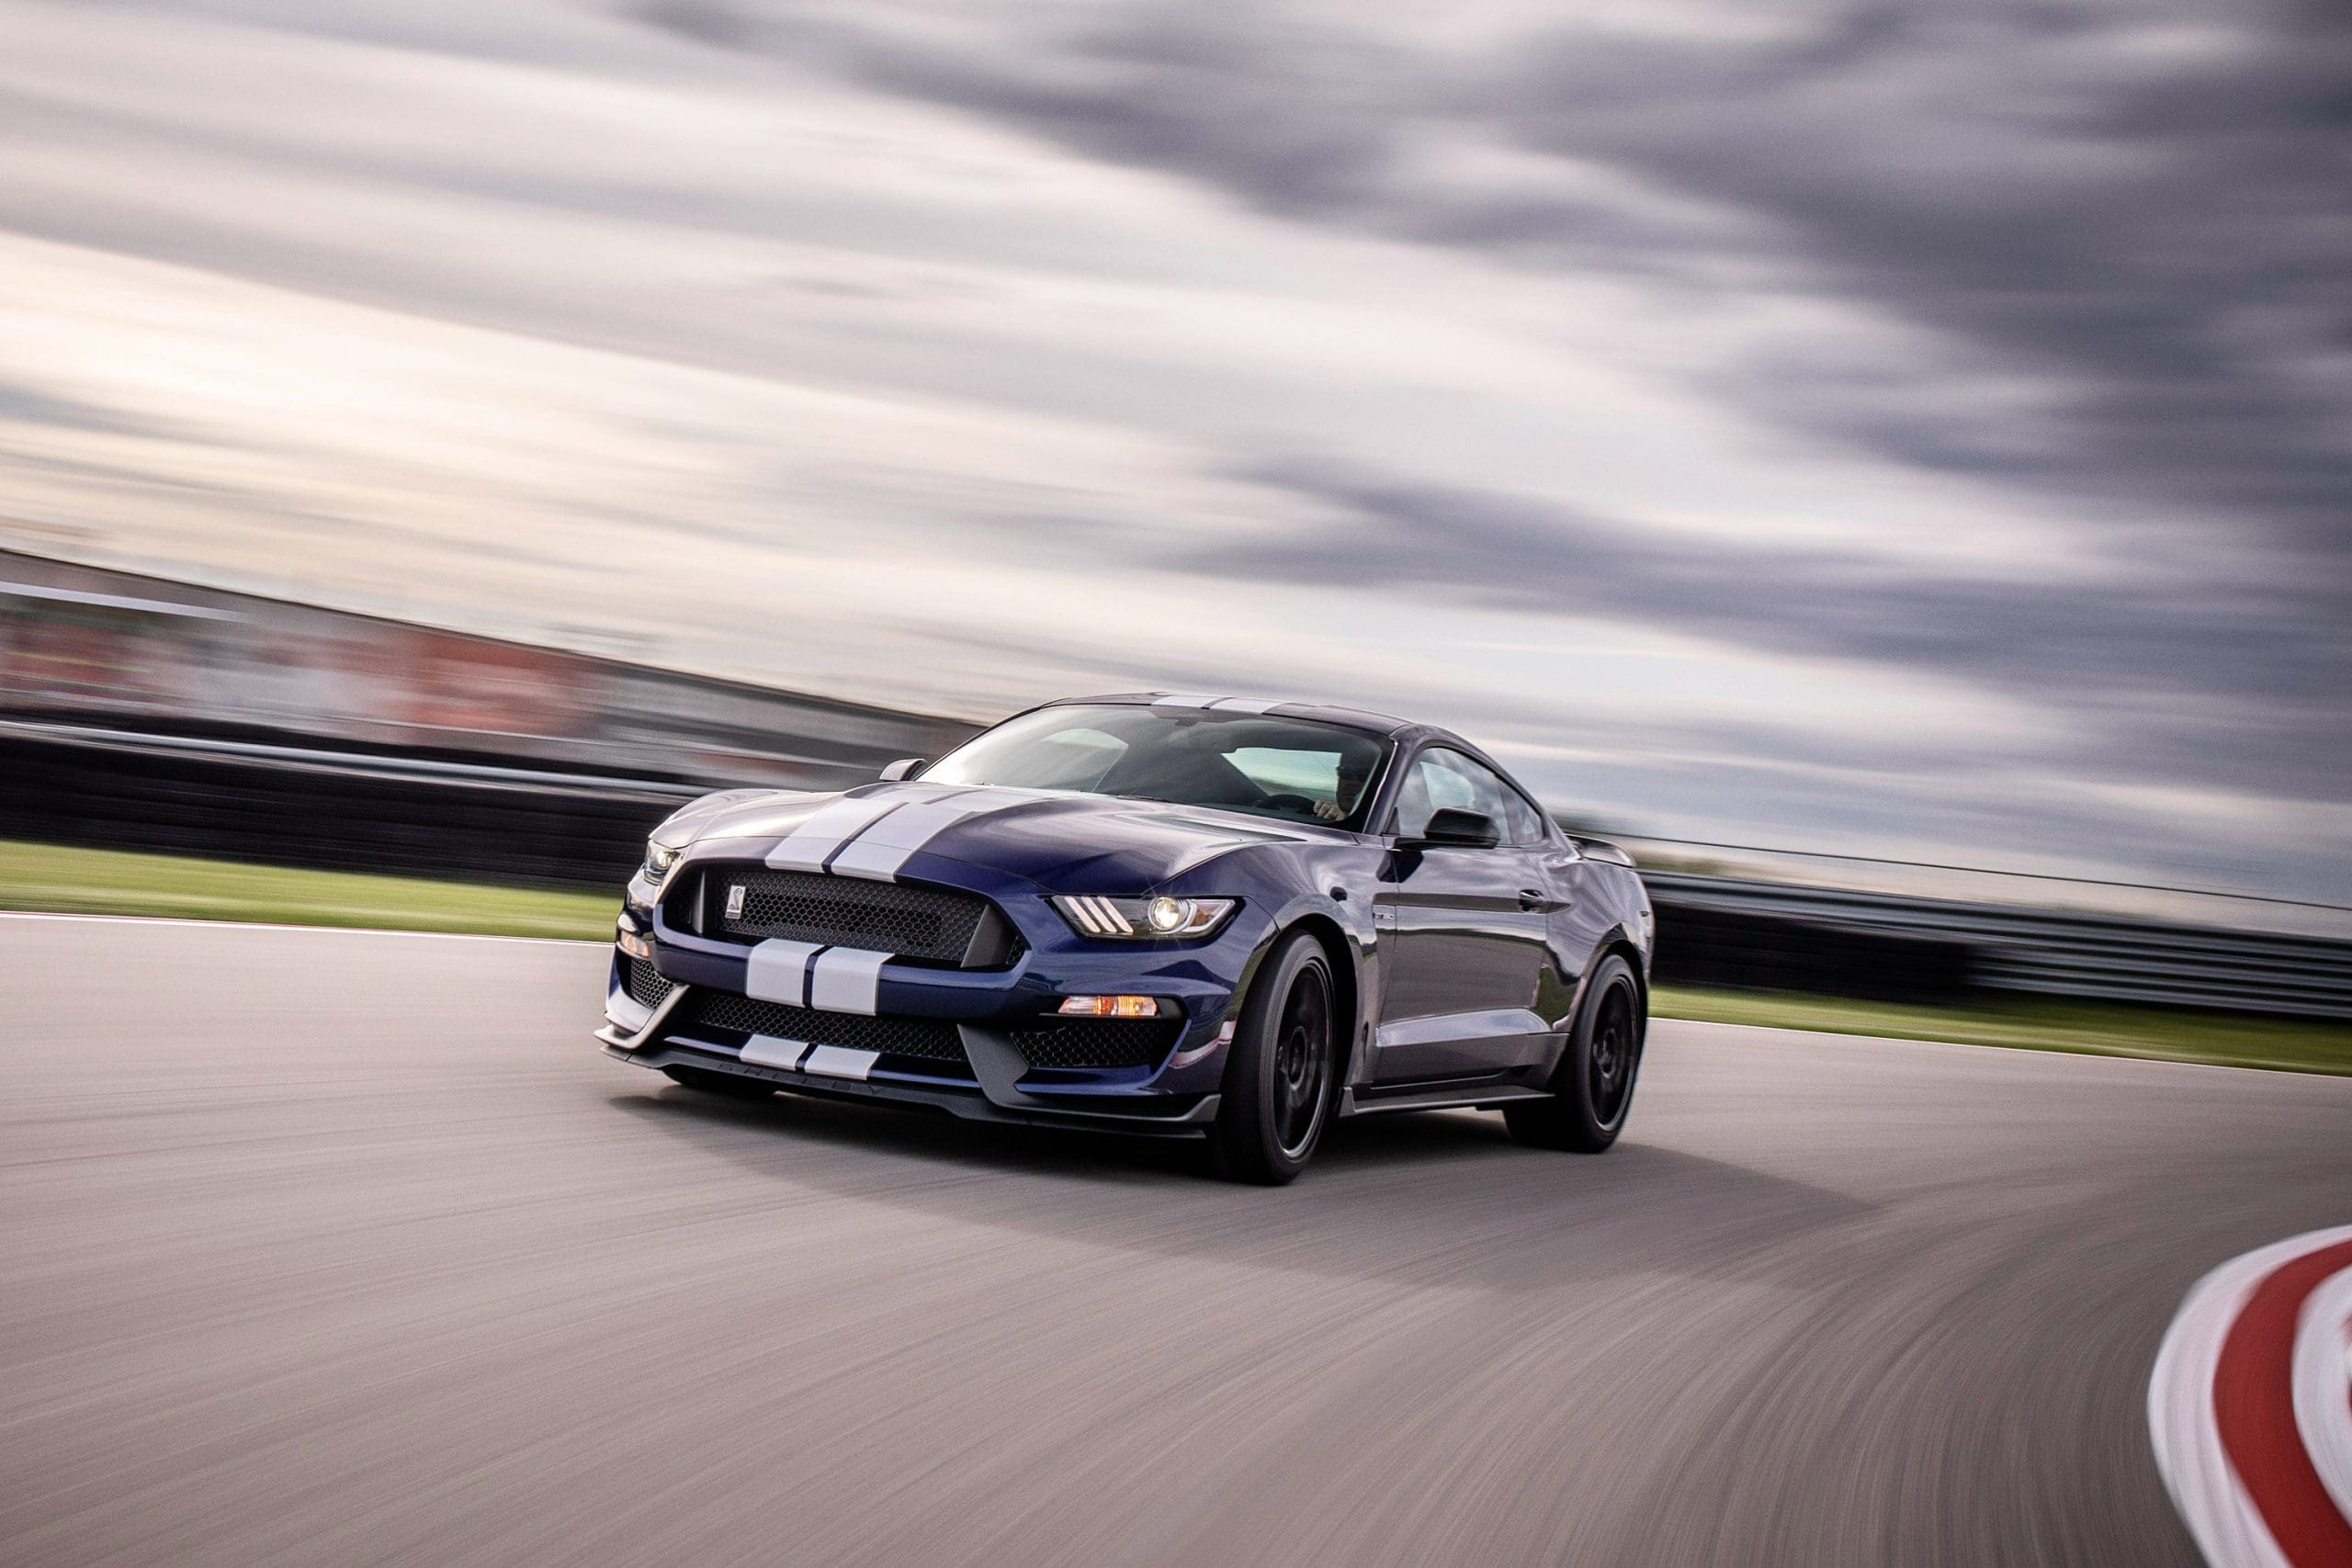 Mustang Of The Day: 2019 Ford Mustang Shelby GT350